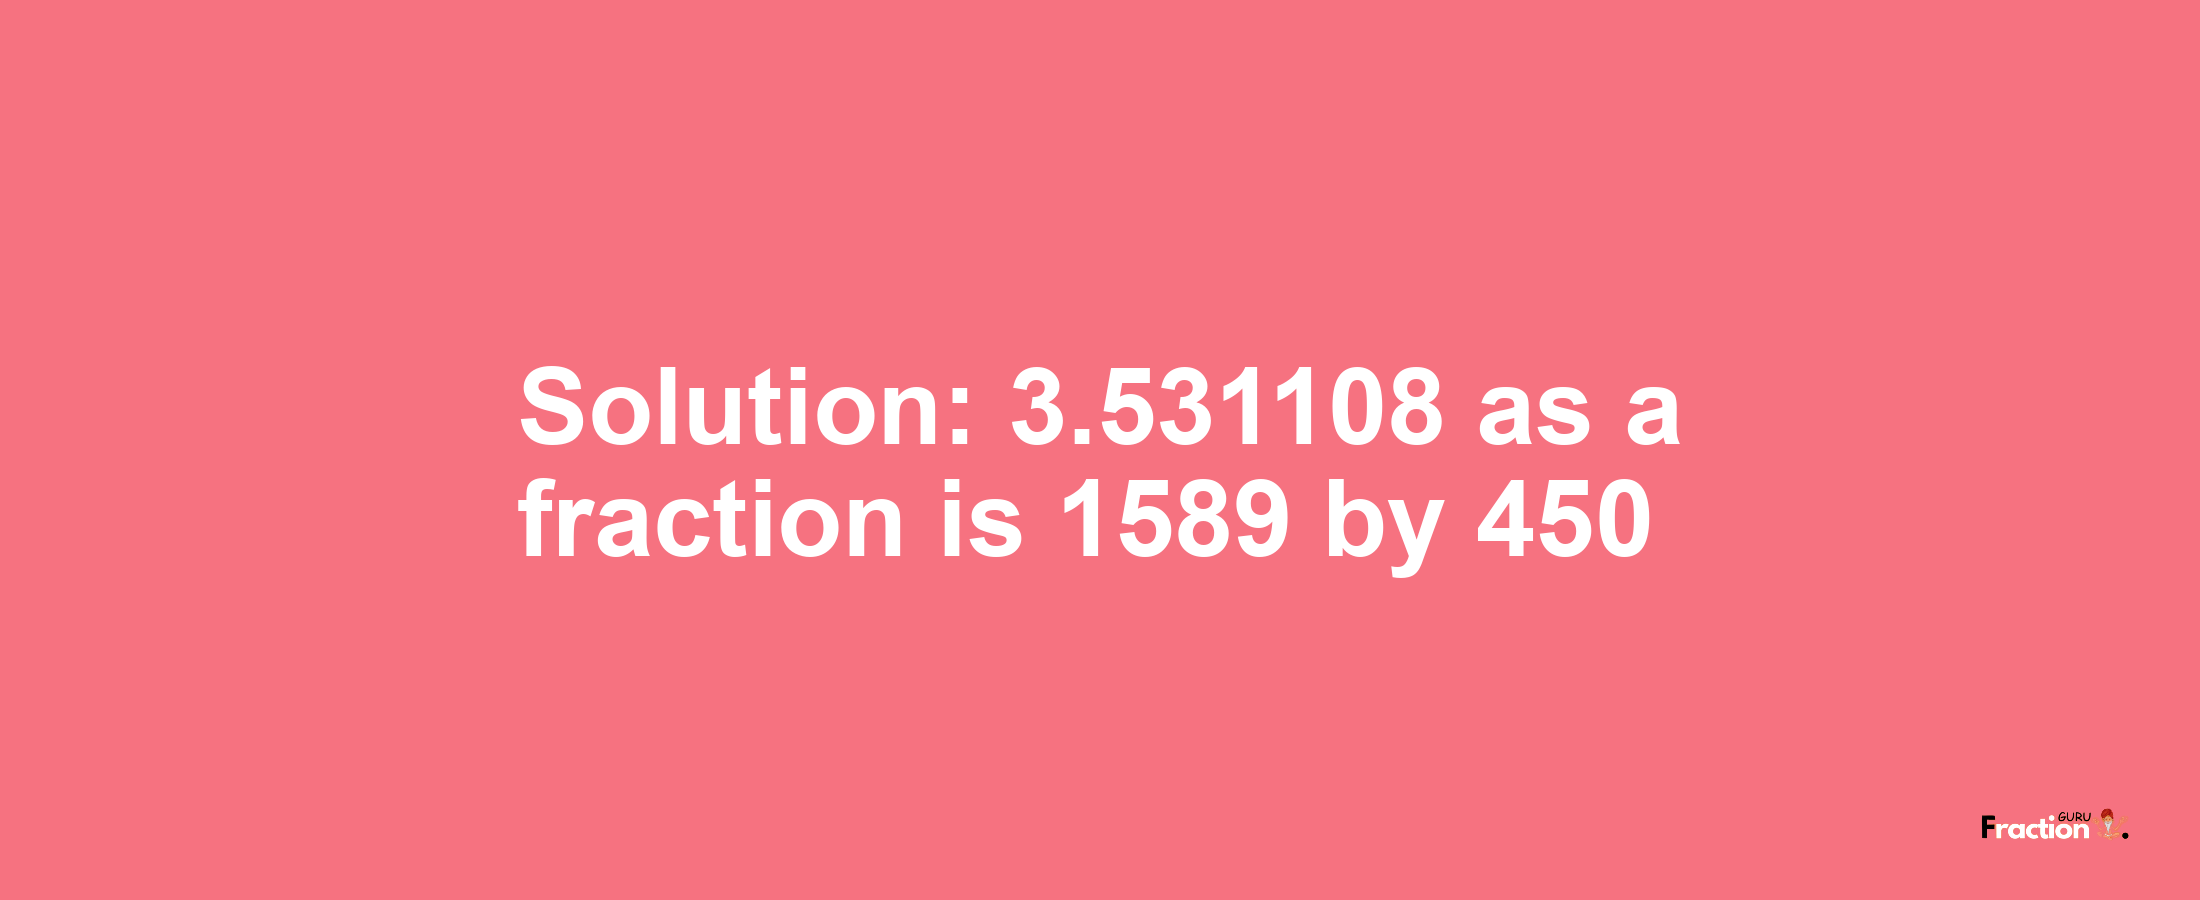 Solution:3.531108 as a fraction is 1589/450